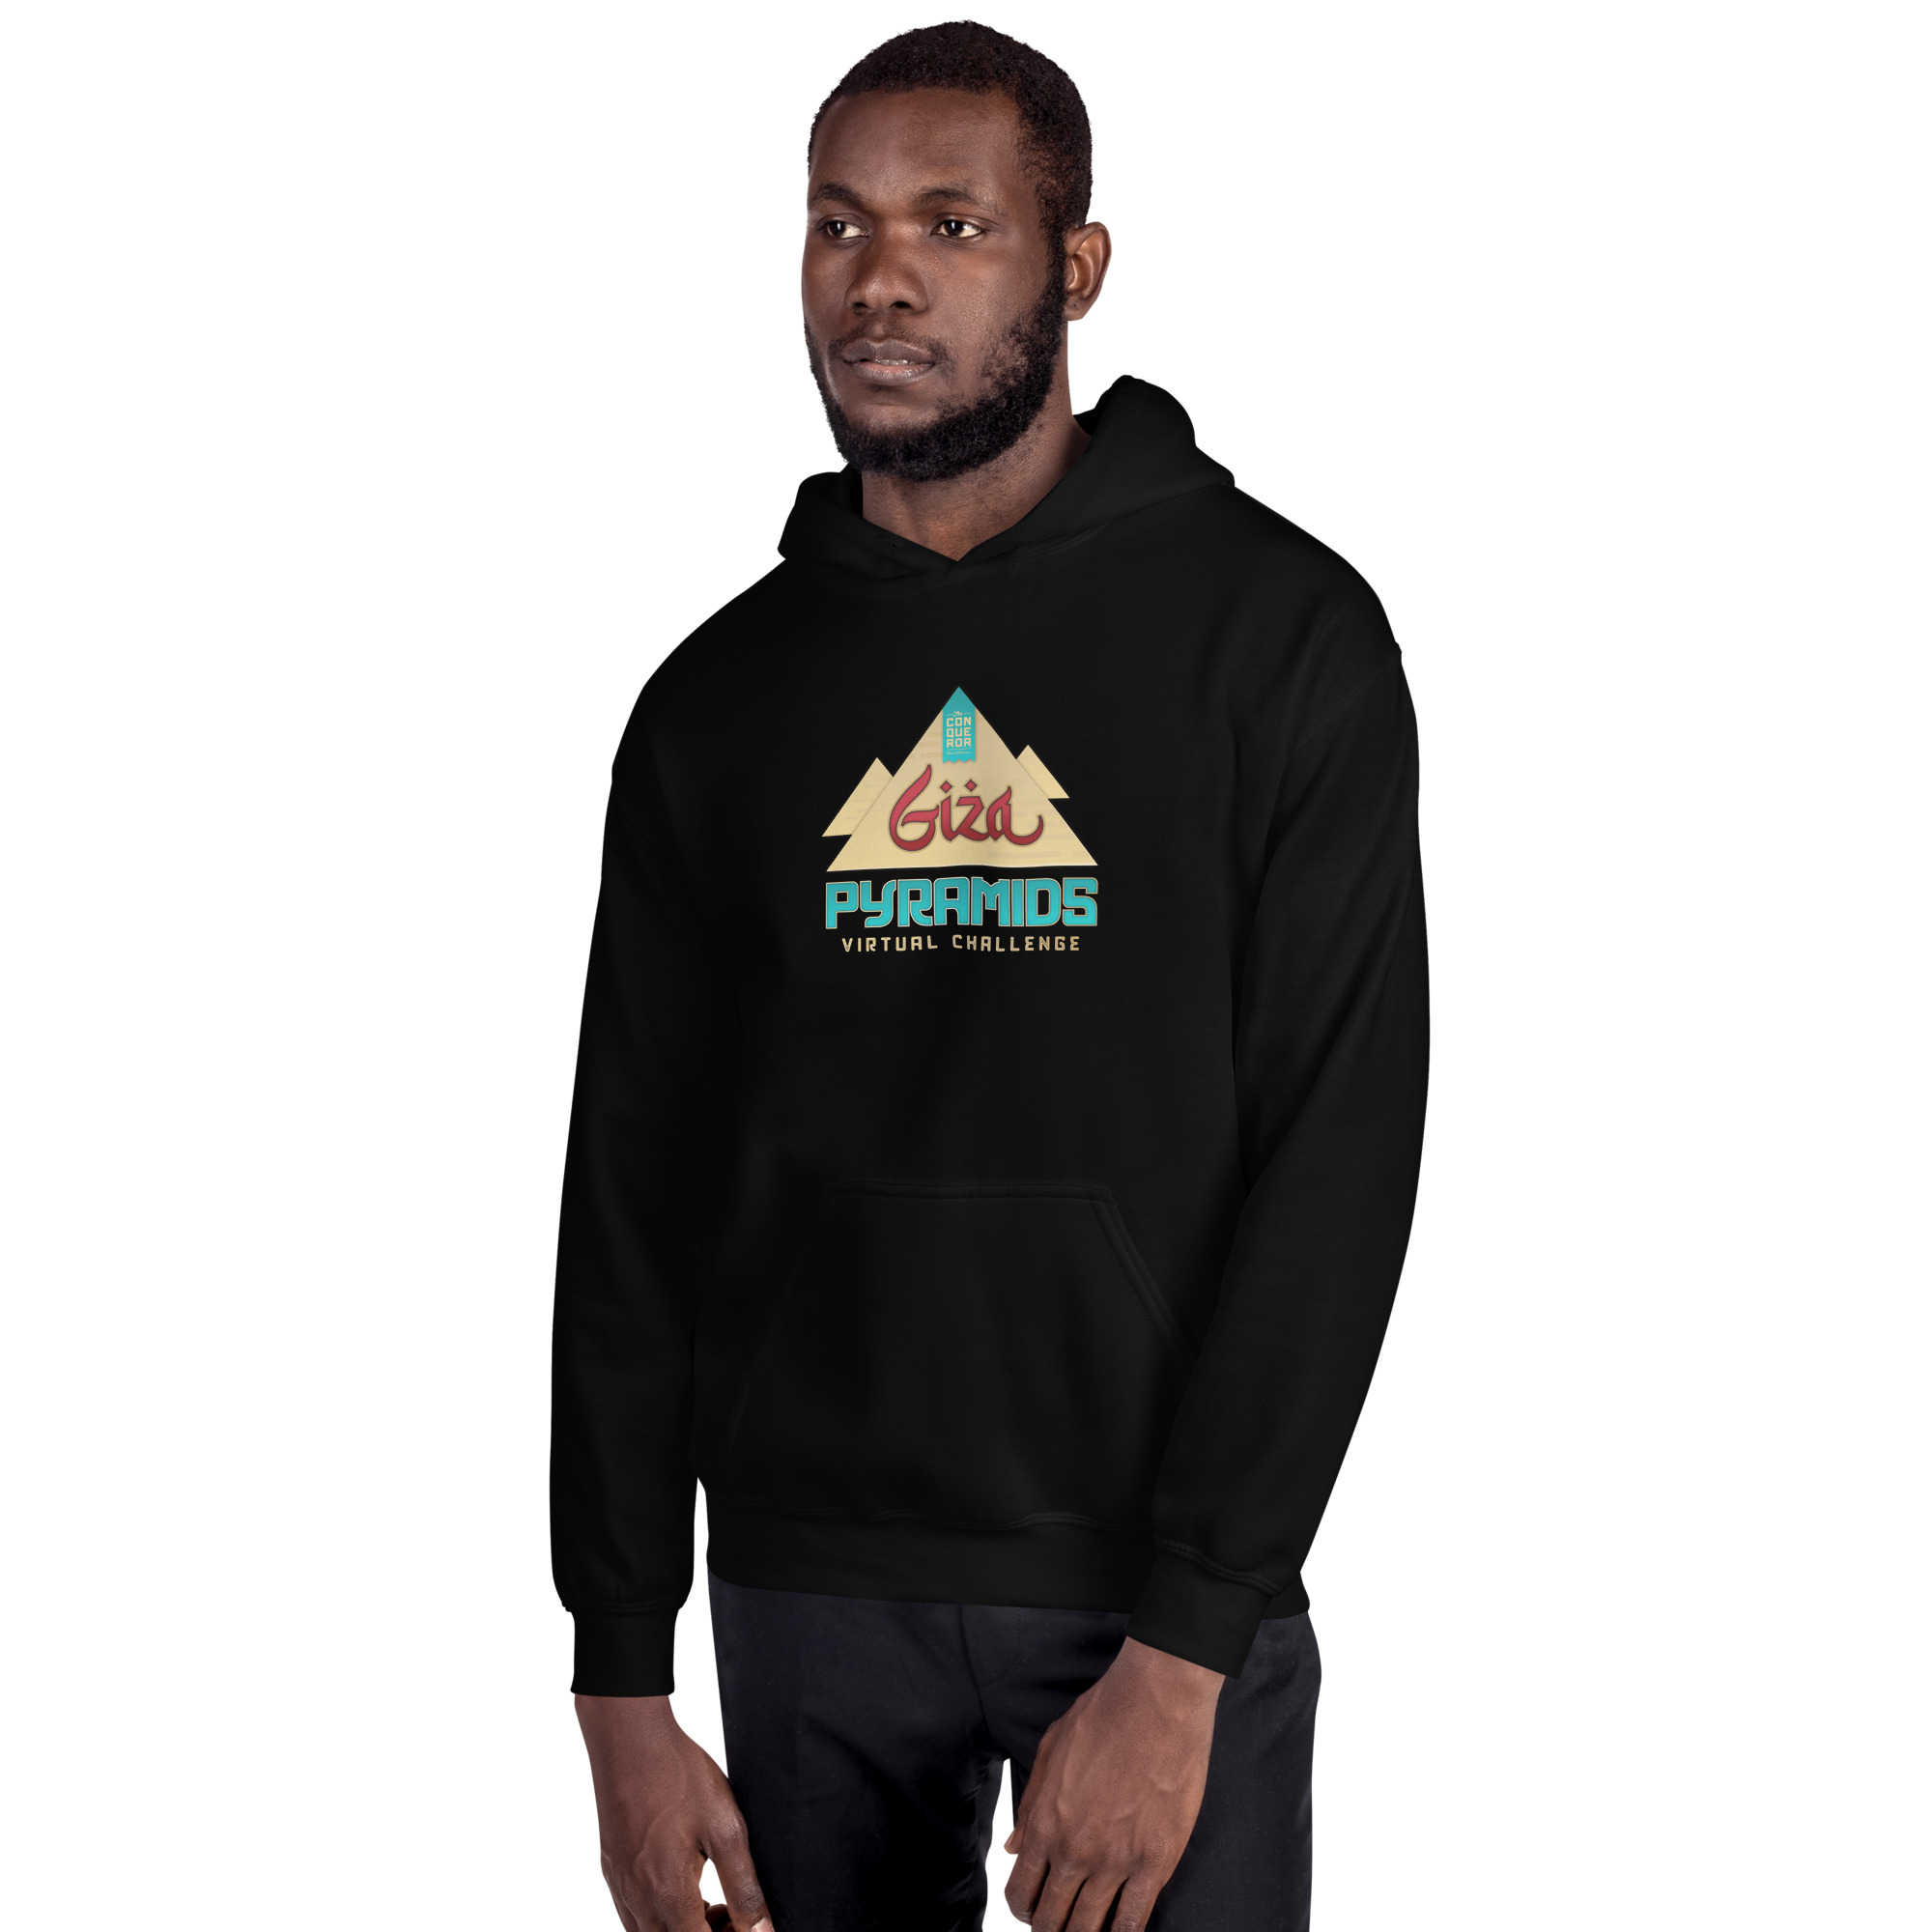 https://www.theconqueror.events/wordpress/wp-content/uploads/2023/04/unisex-heavy-blend-hoodie-black-front-2-644683a71199e.jpg